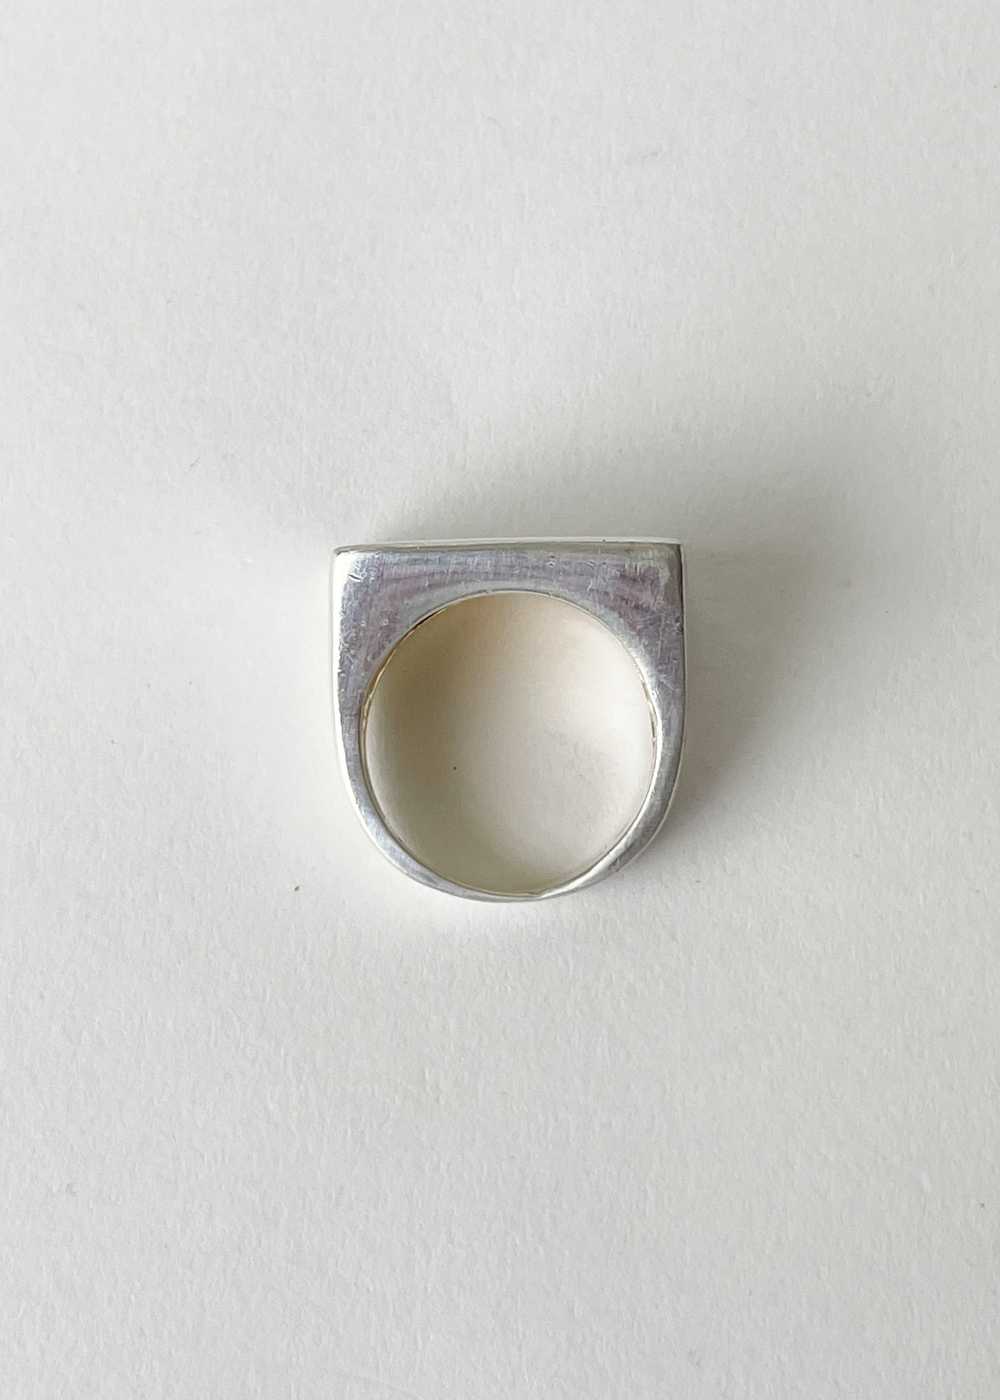 Vintage Italian Sterling Silver Ring - image 2